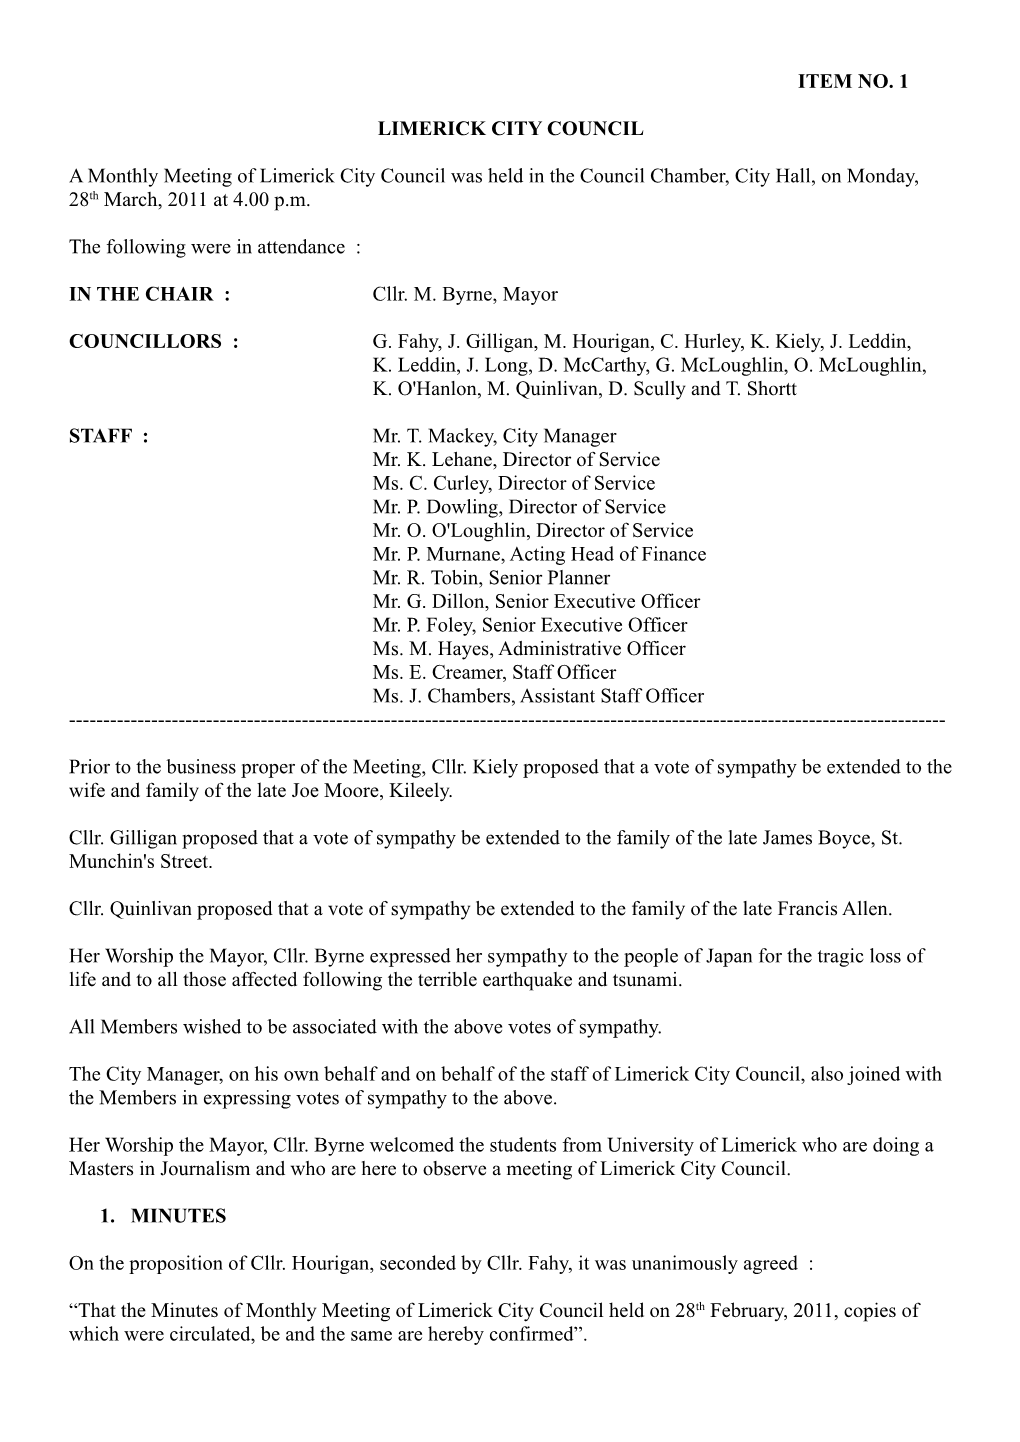 ITEM NO. 1 LIMERICK CITY COUNCIL a Monthly Meeting Of